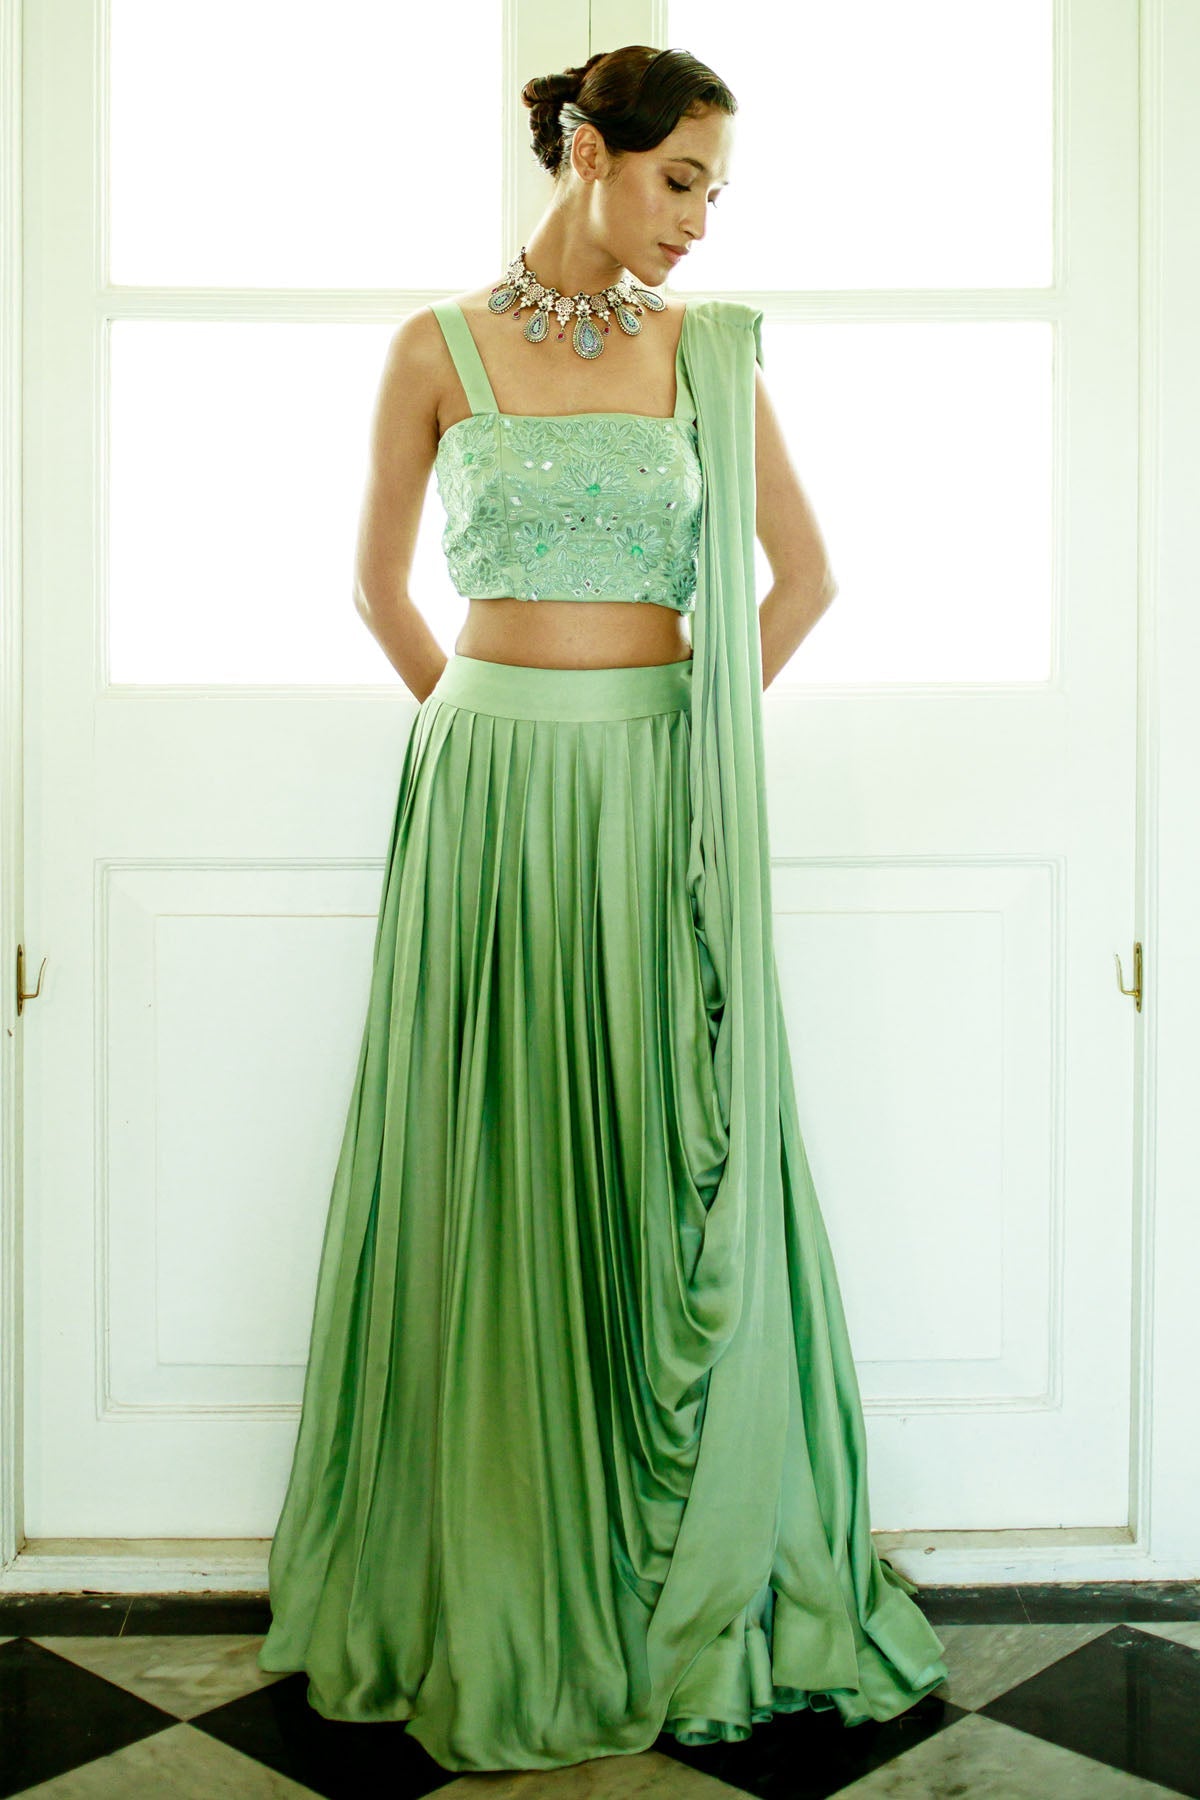 Pavone Mirror Embroidered Lehenga Set for women online at ScrollnShops